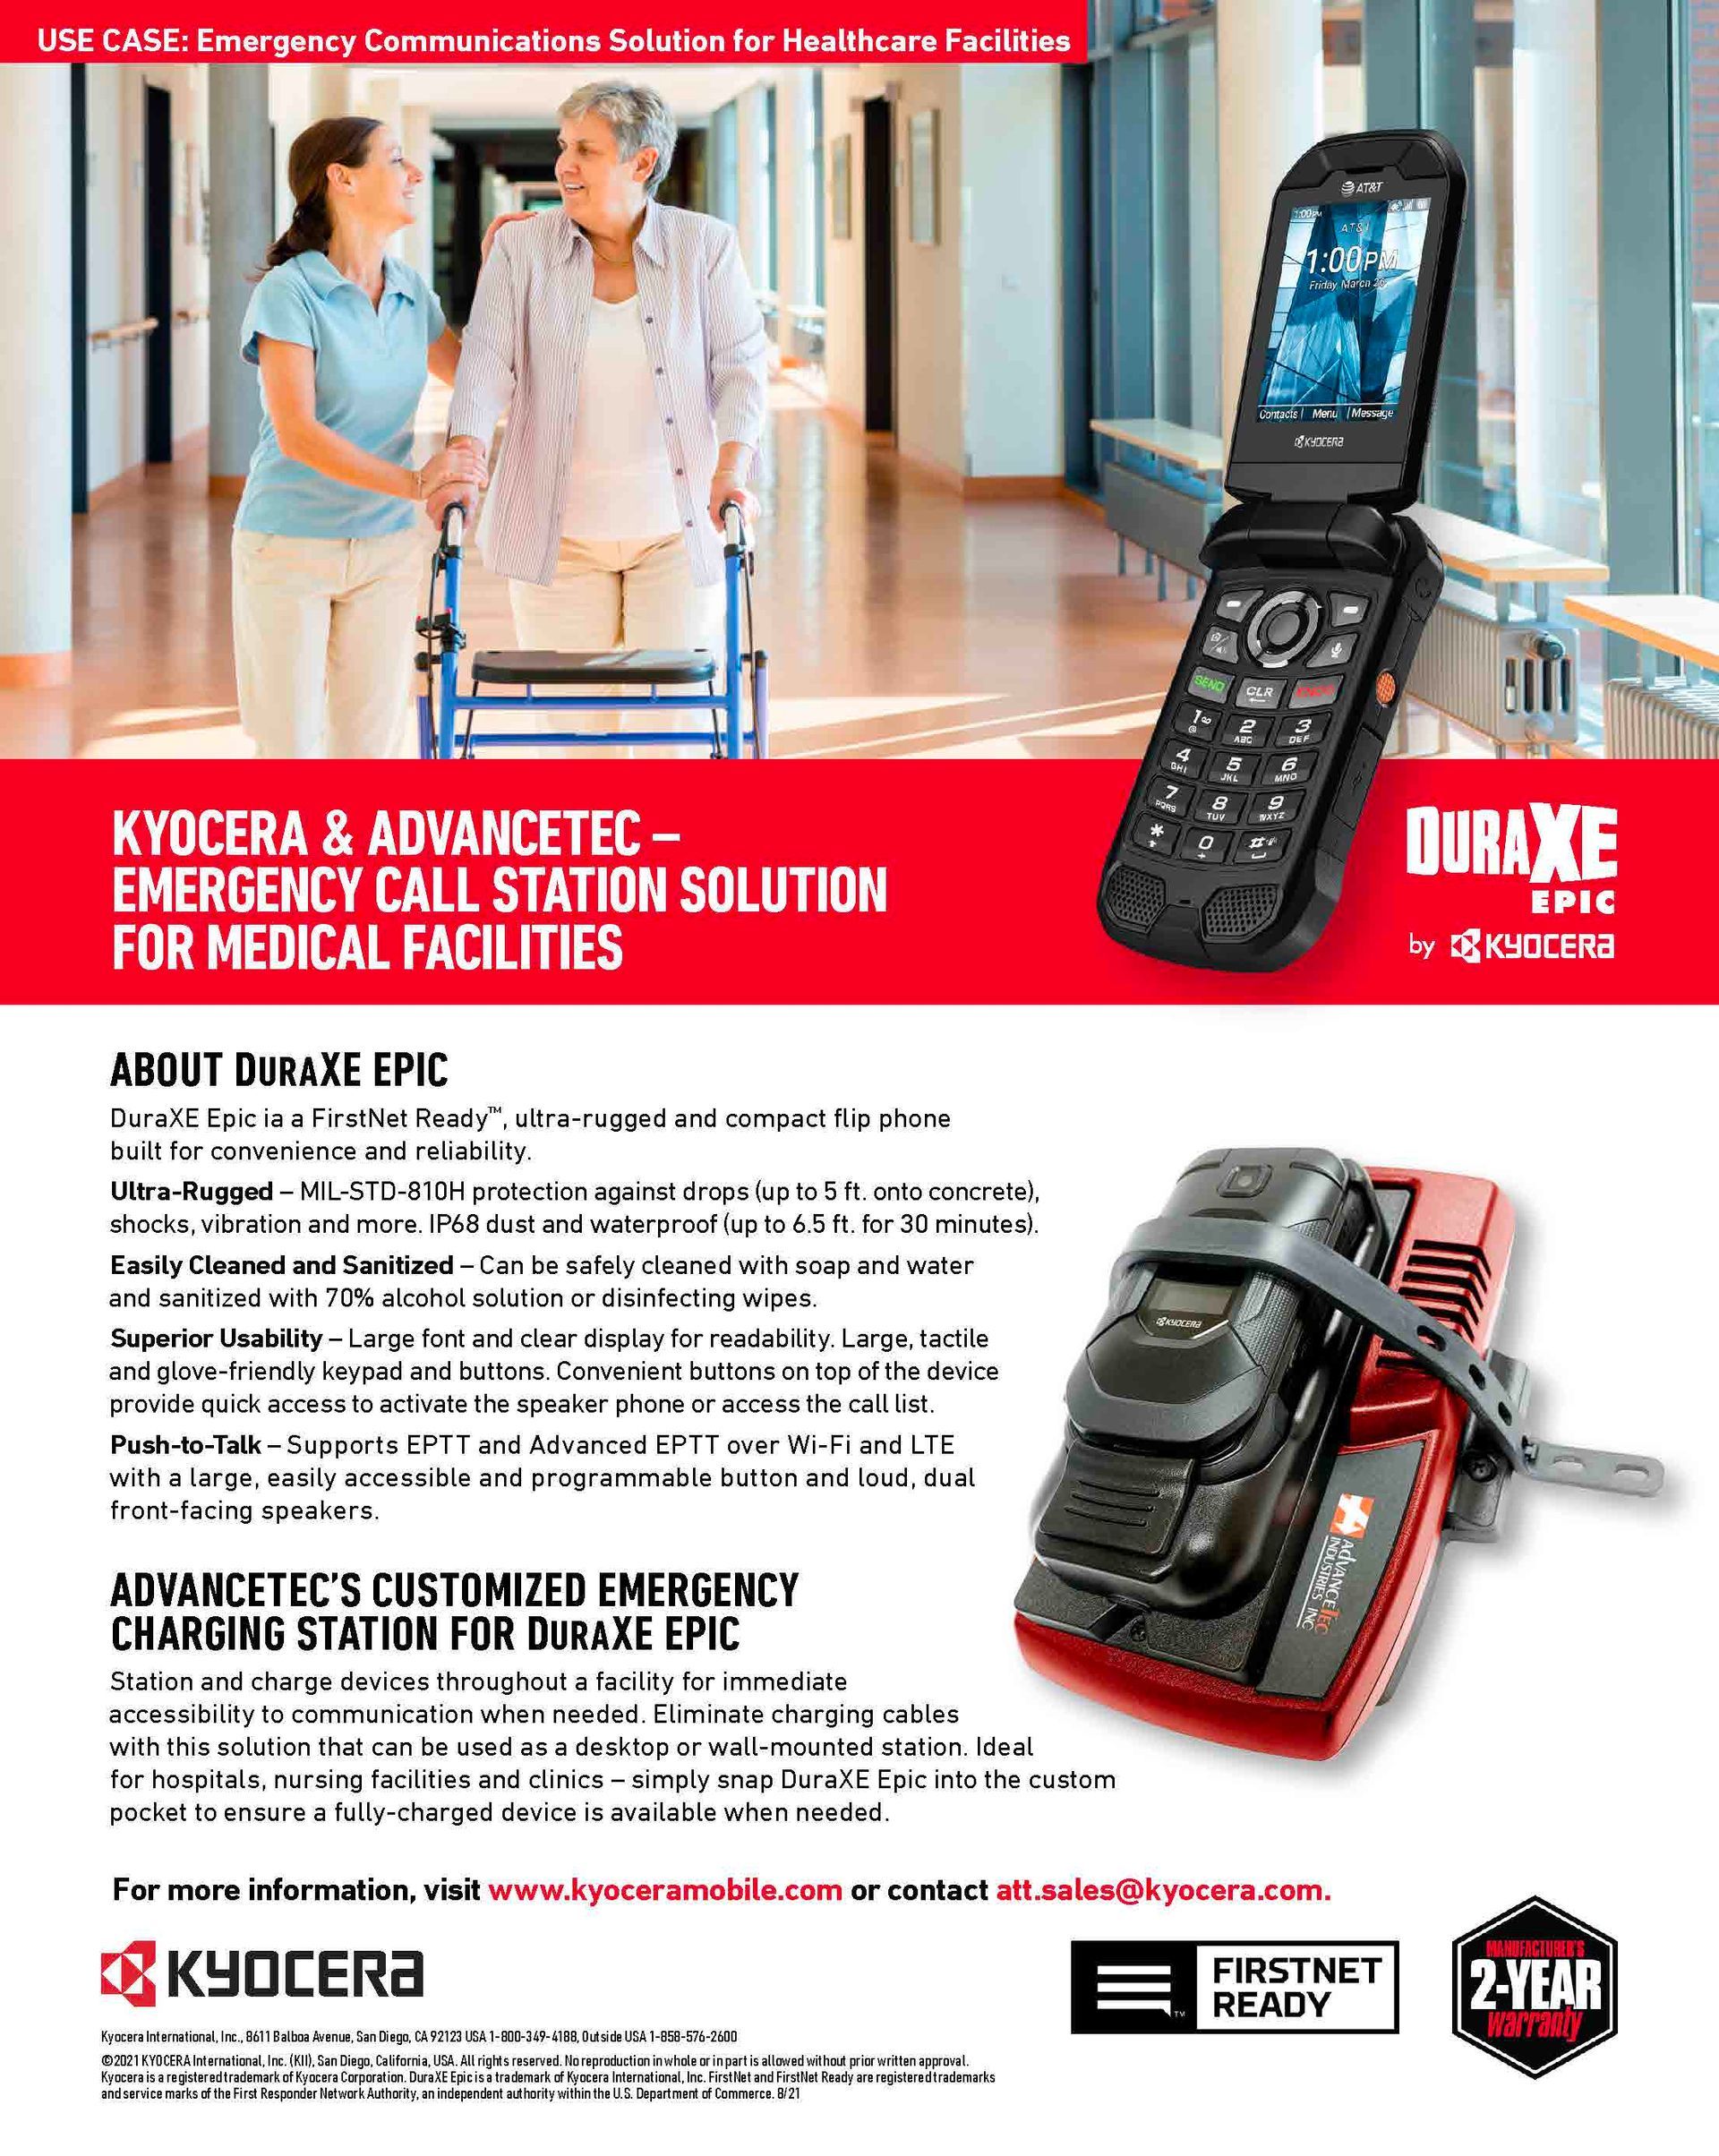 A brochure for a kyocera emergency call station solution for medical facilities